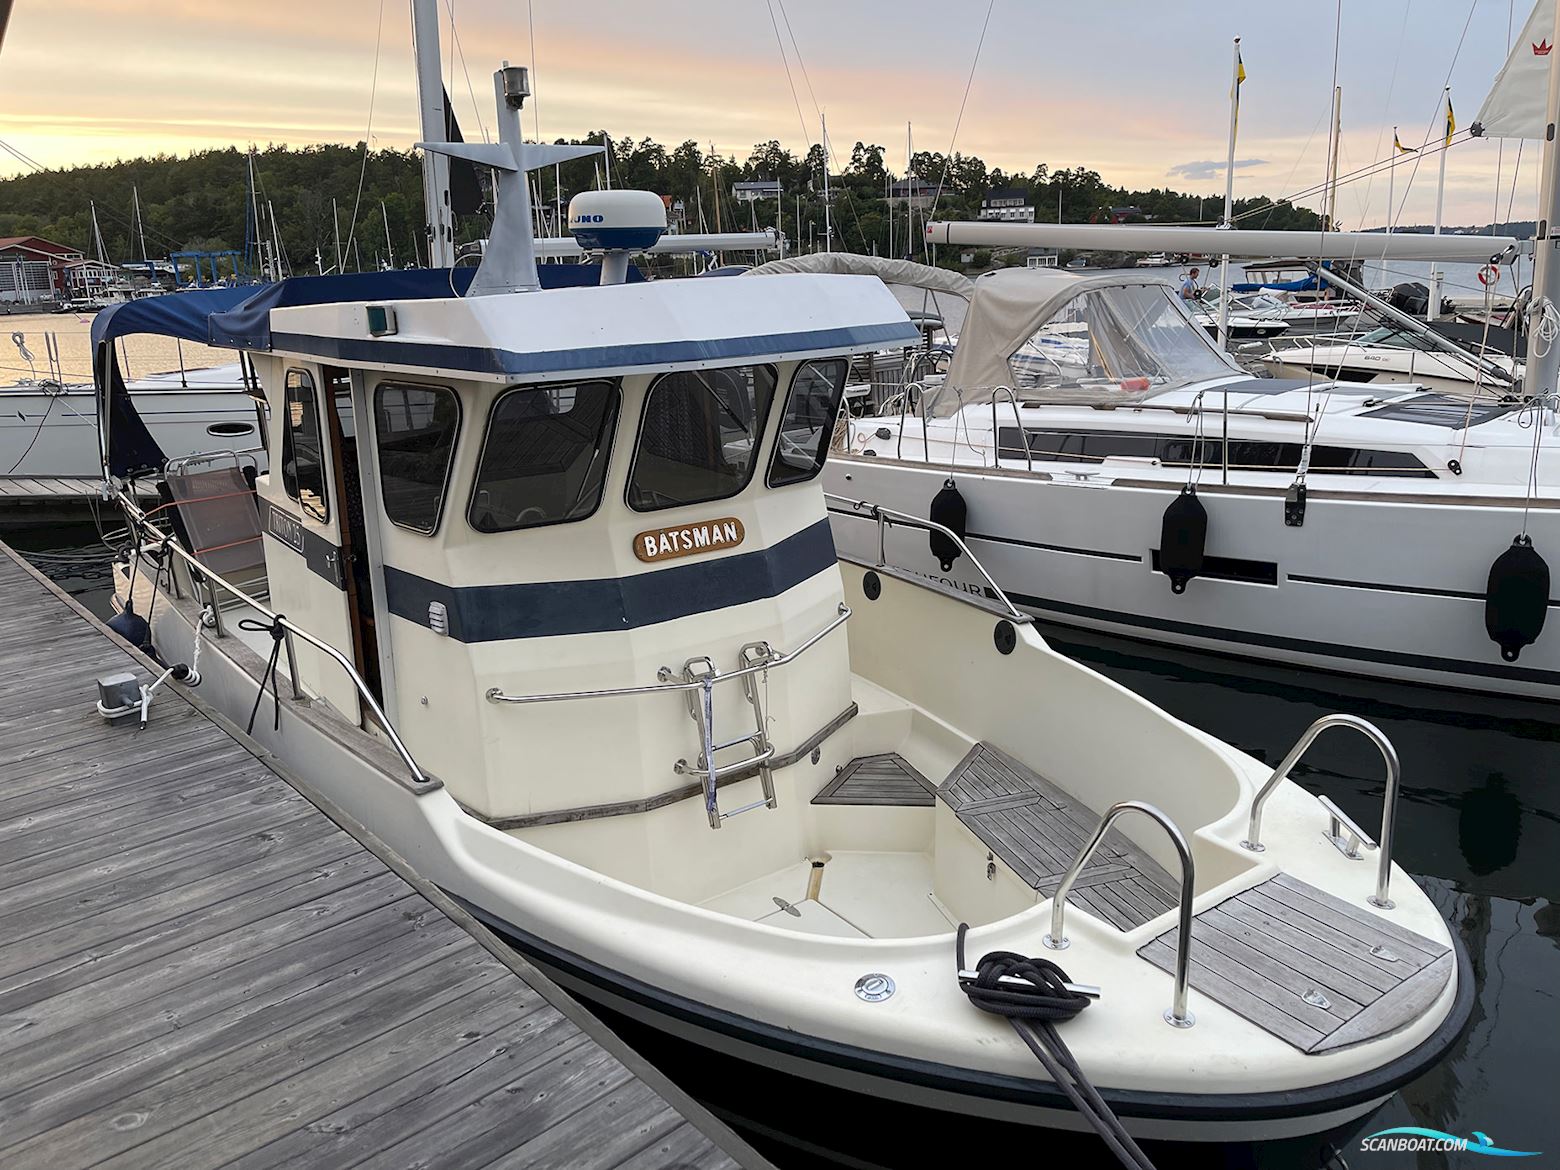 Other Motorboats (Should be Deleted) Triton 25 Motorboot 1997, mit Volvo Penta Kad 42 motor, Sweden